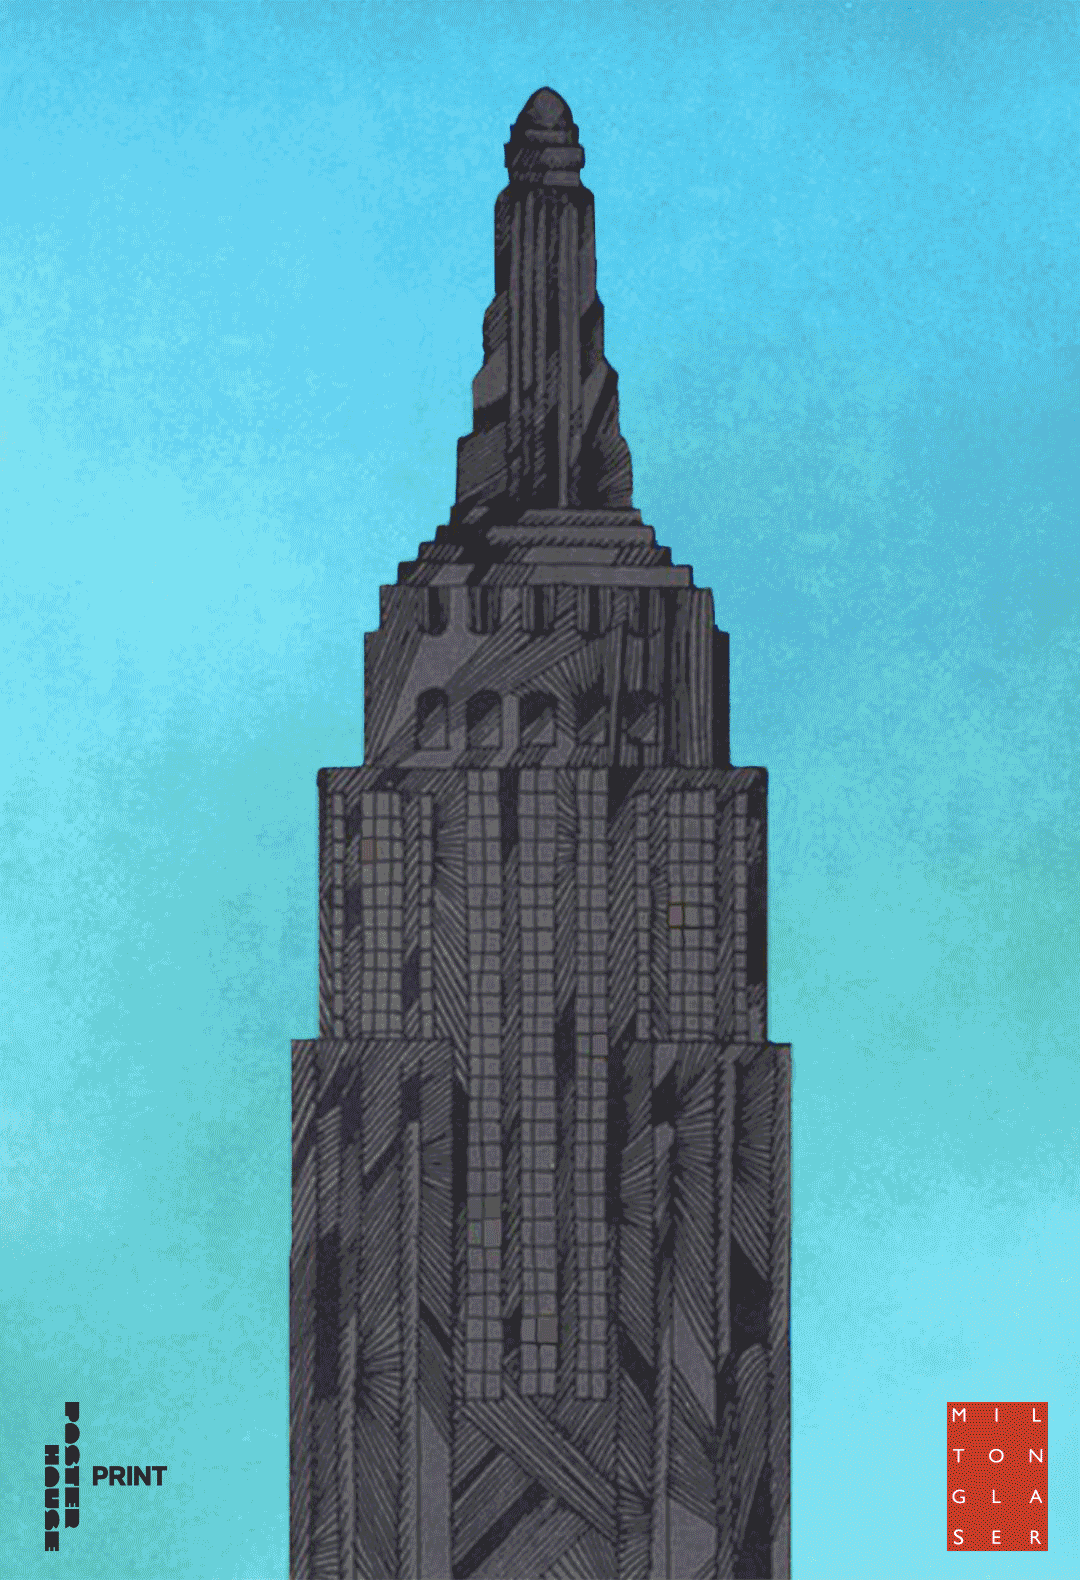 An animation featuring an illustrative poster by Milton Glaser of the empire state building.